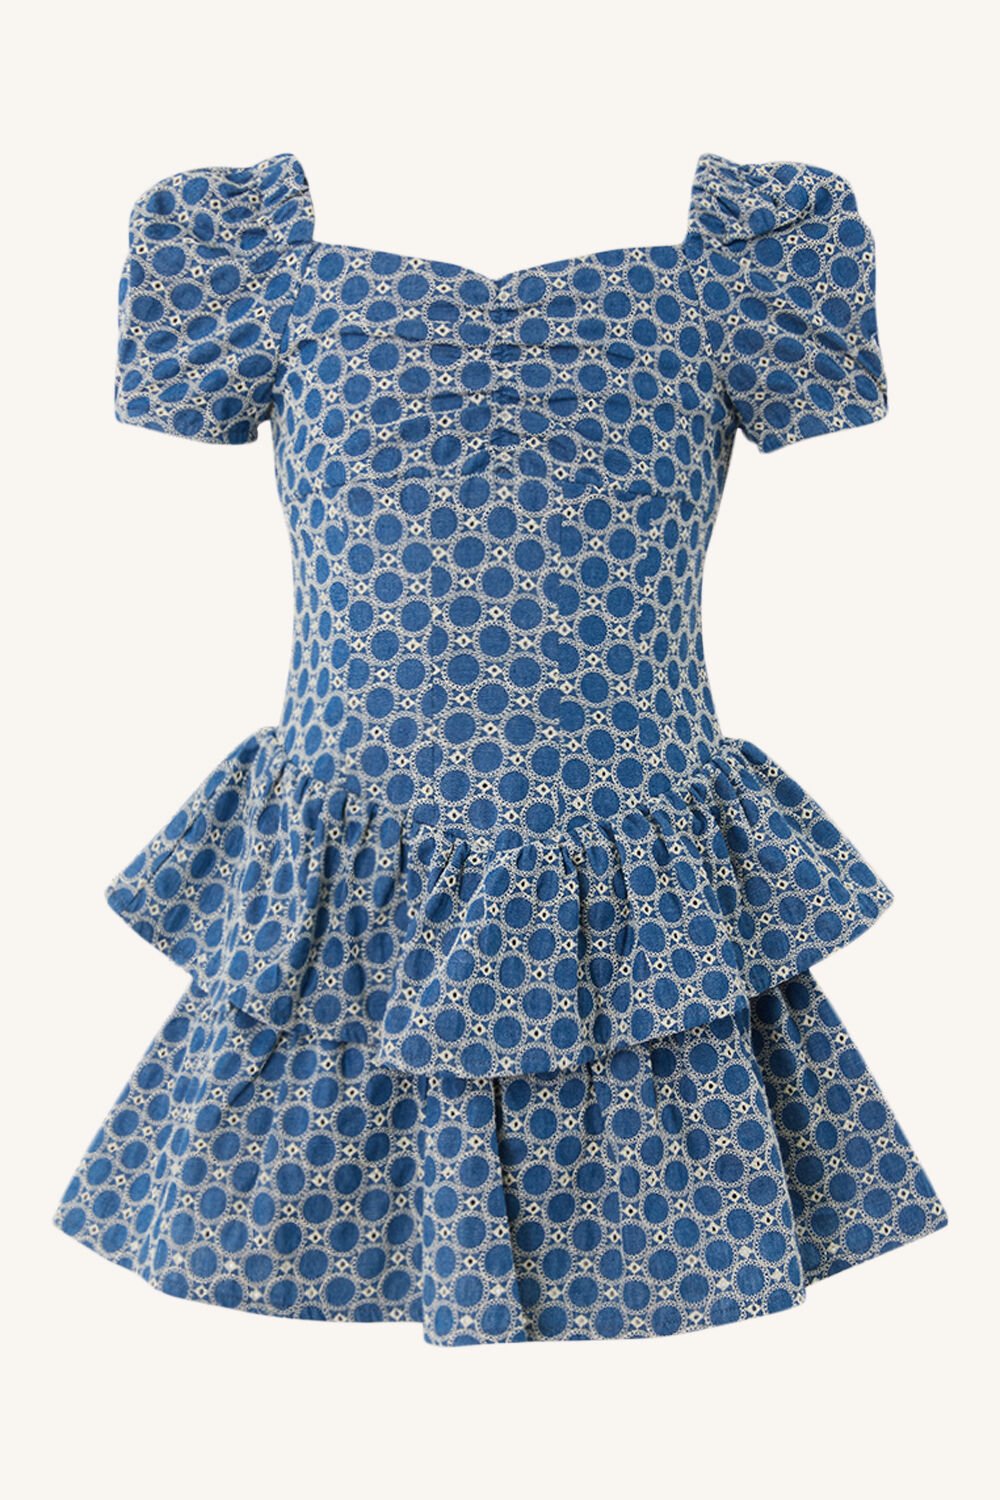 BABY GIRL BRODERIE CORSET DRESS in colour CHAMBRAY BLUE